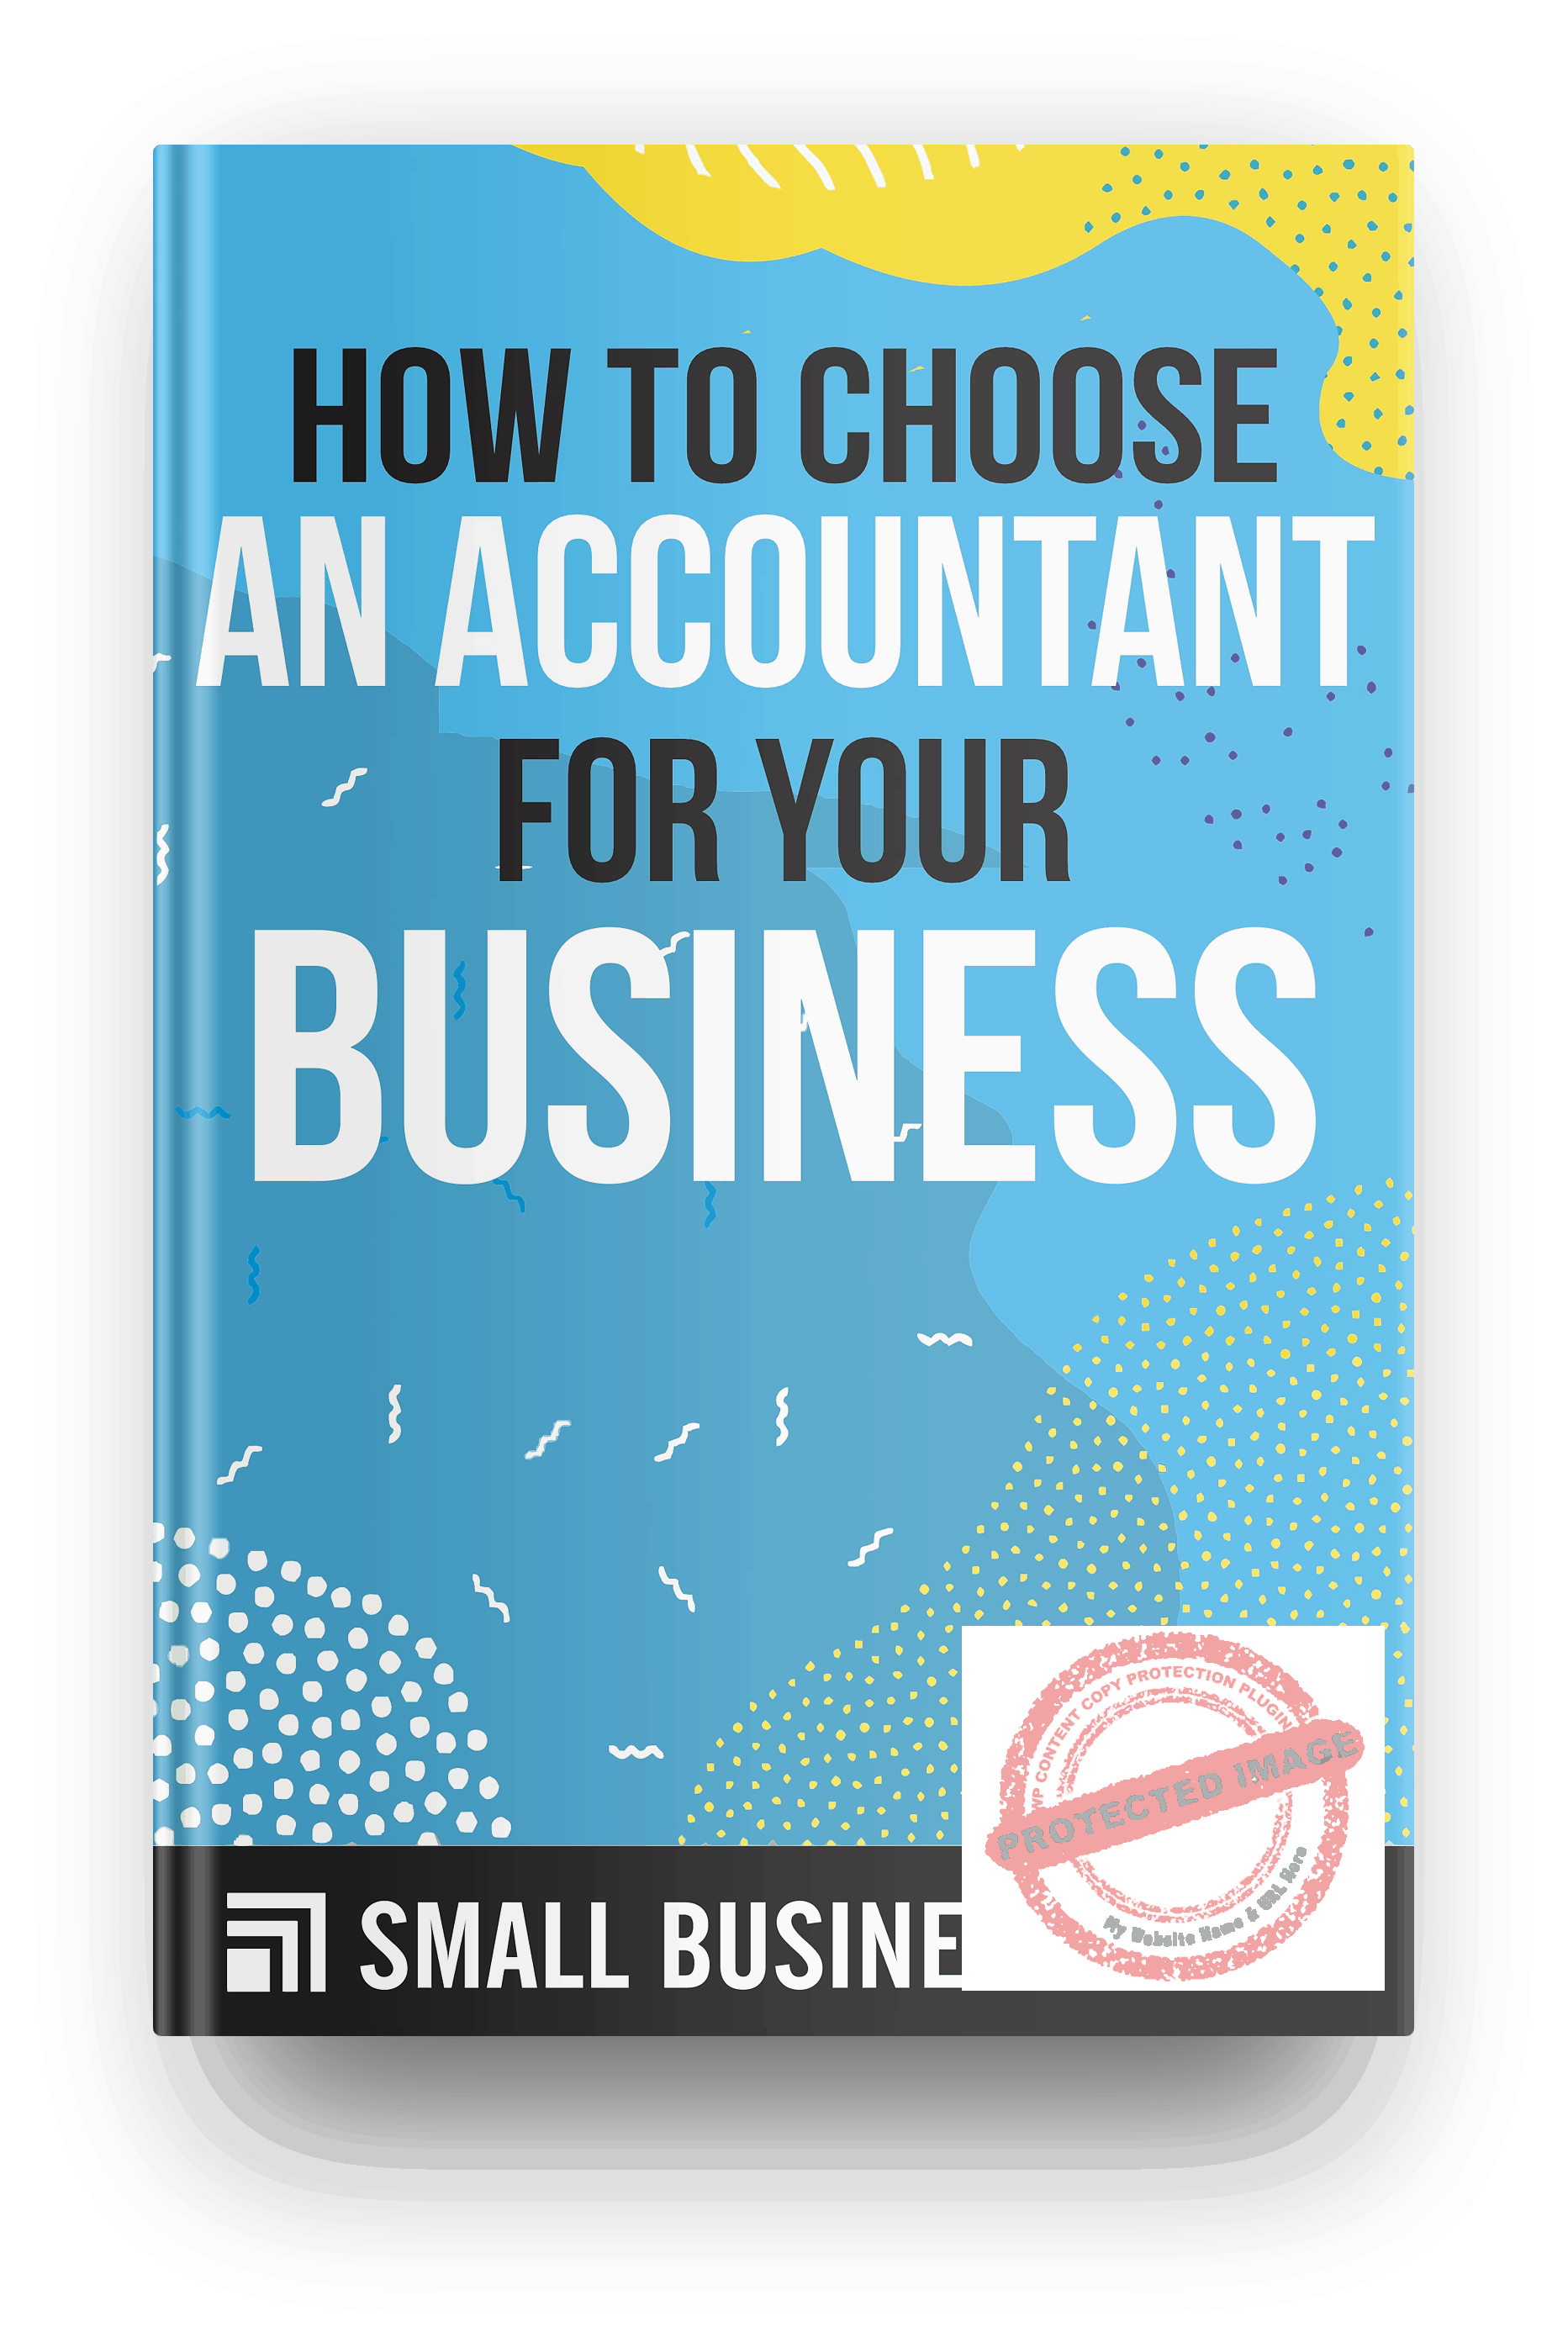 How to choose an accountant for your business